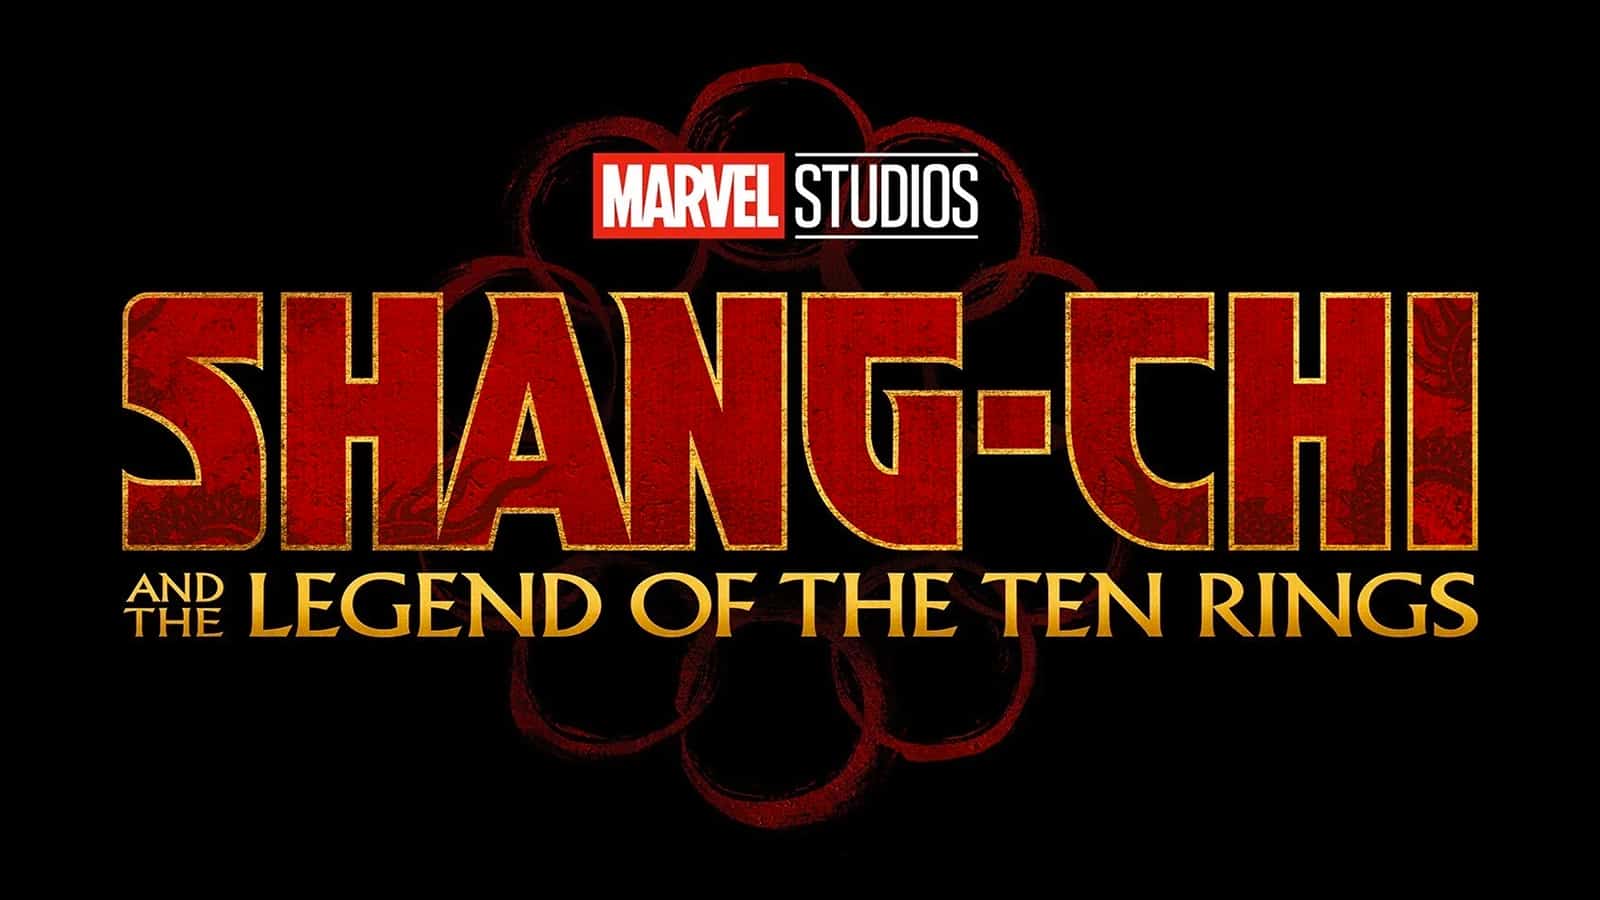 Shang Chi and the Legend of the Ten Rings logo